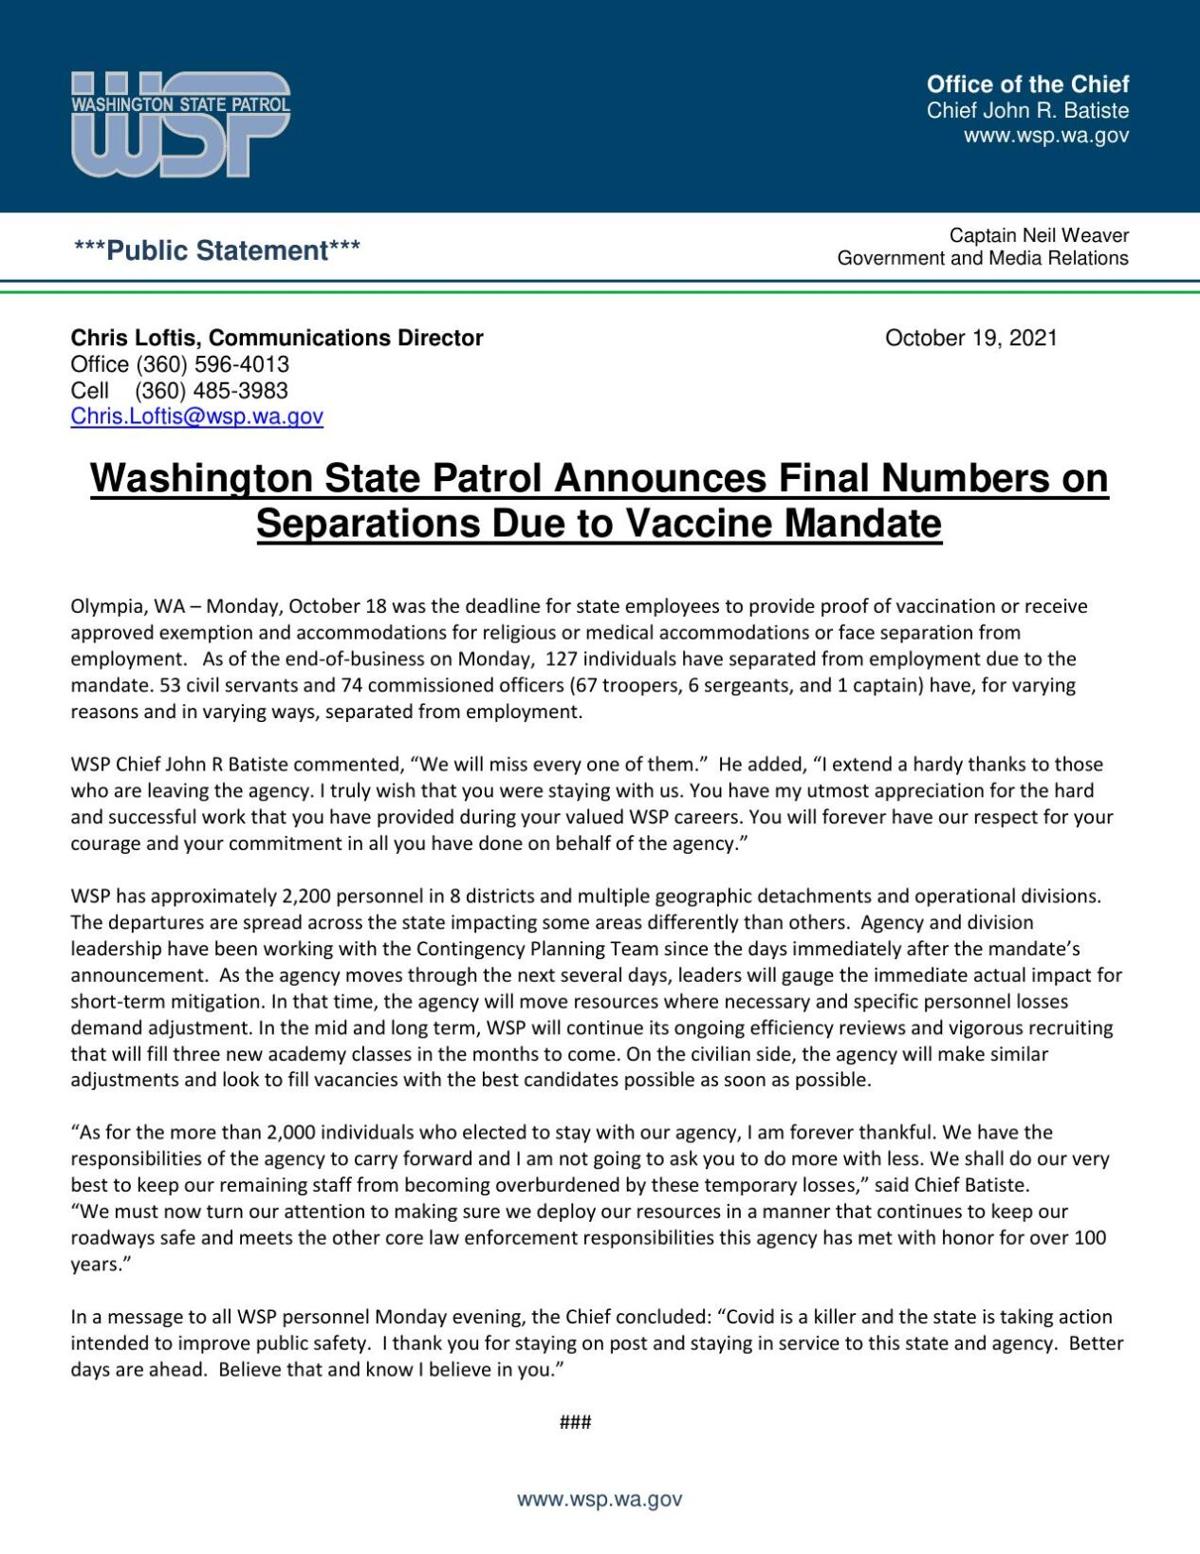 Washington State Patrol Announces Final Numbers on  Separations Due to Vaccine Mandate